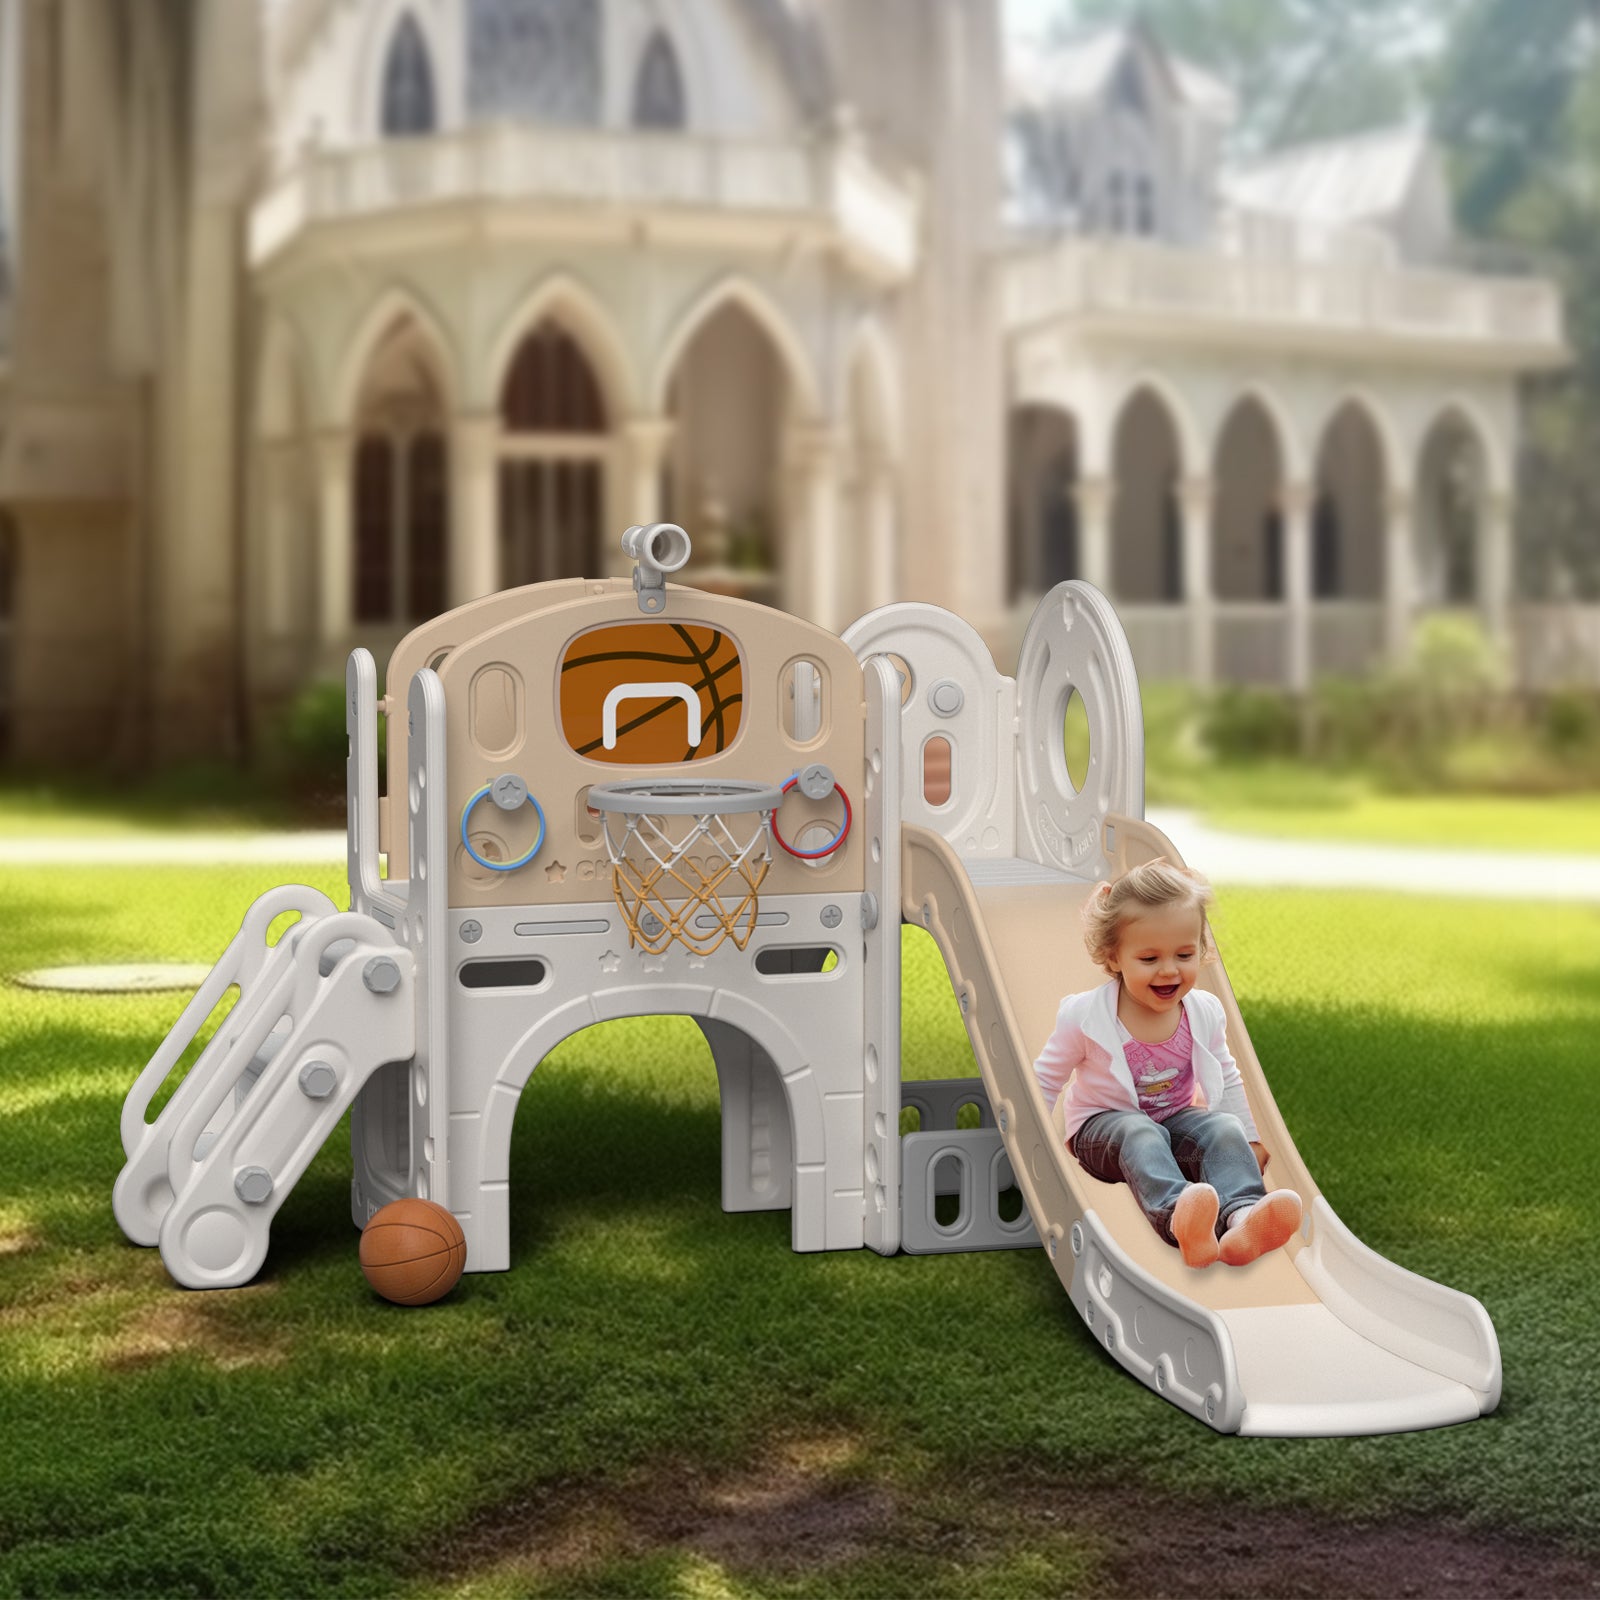 XJD 8-in-1 Kids Slide with Climber with Basketball Hoop, Tunnel, Telescope and Storage Space, Freestanding Indoor/Outdoor Toddler Play Set, Beige Coffee